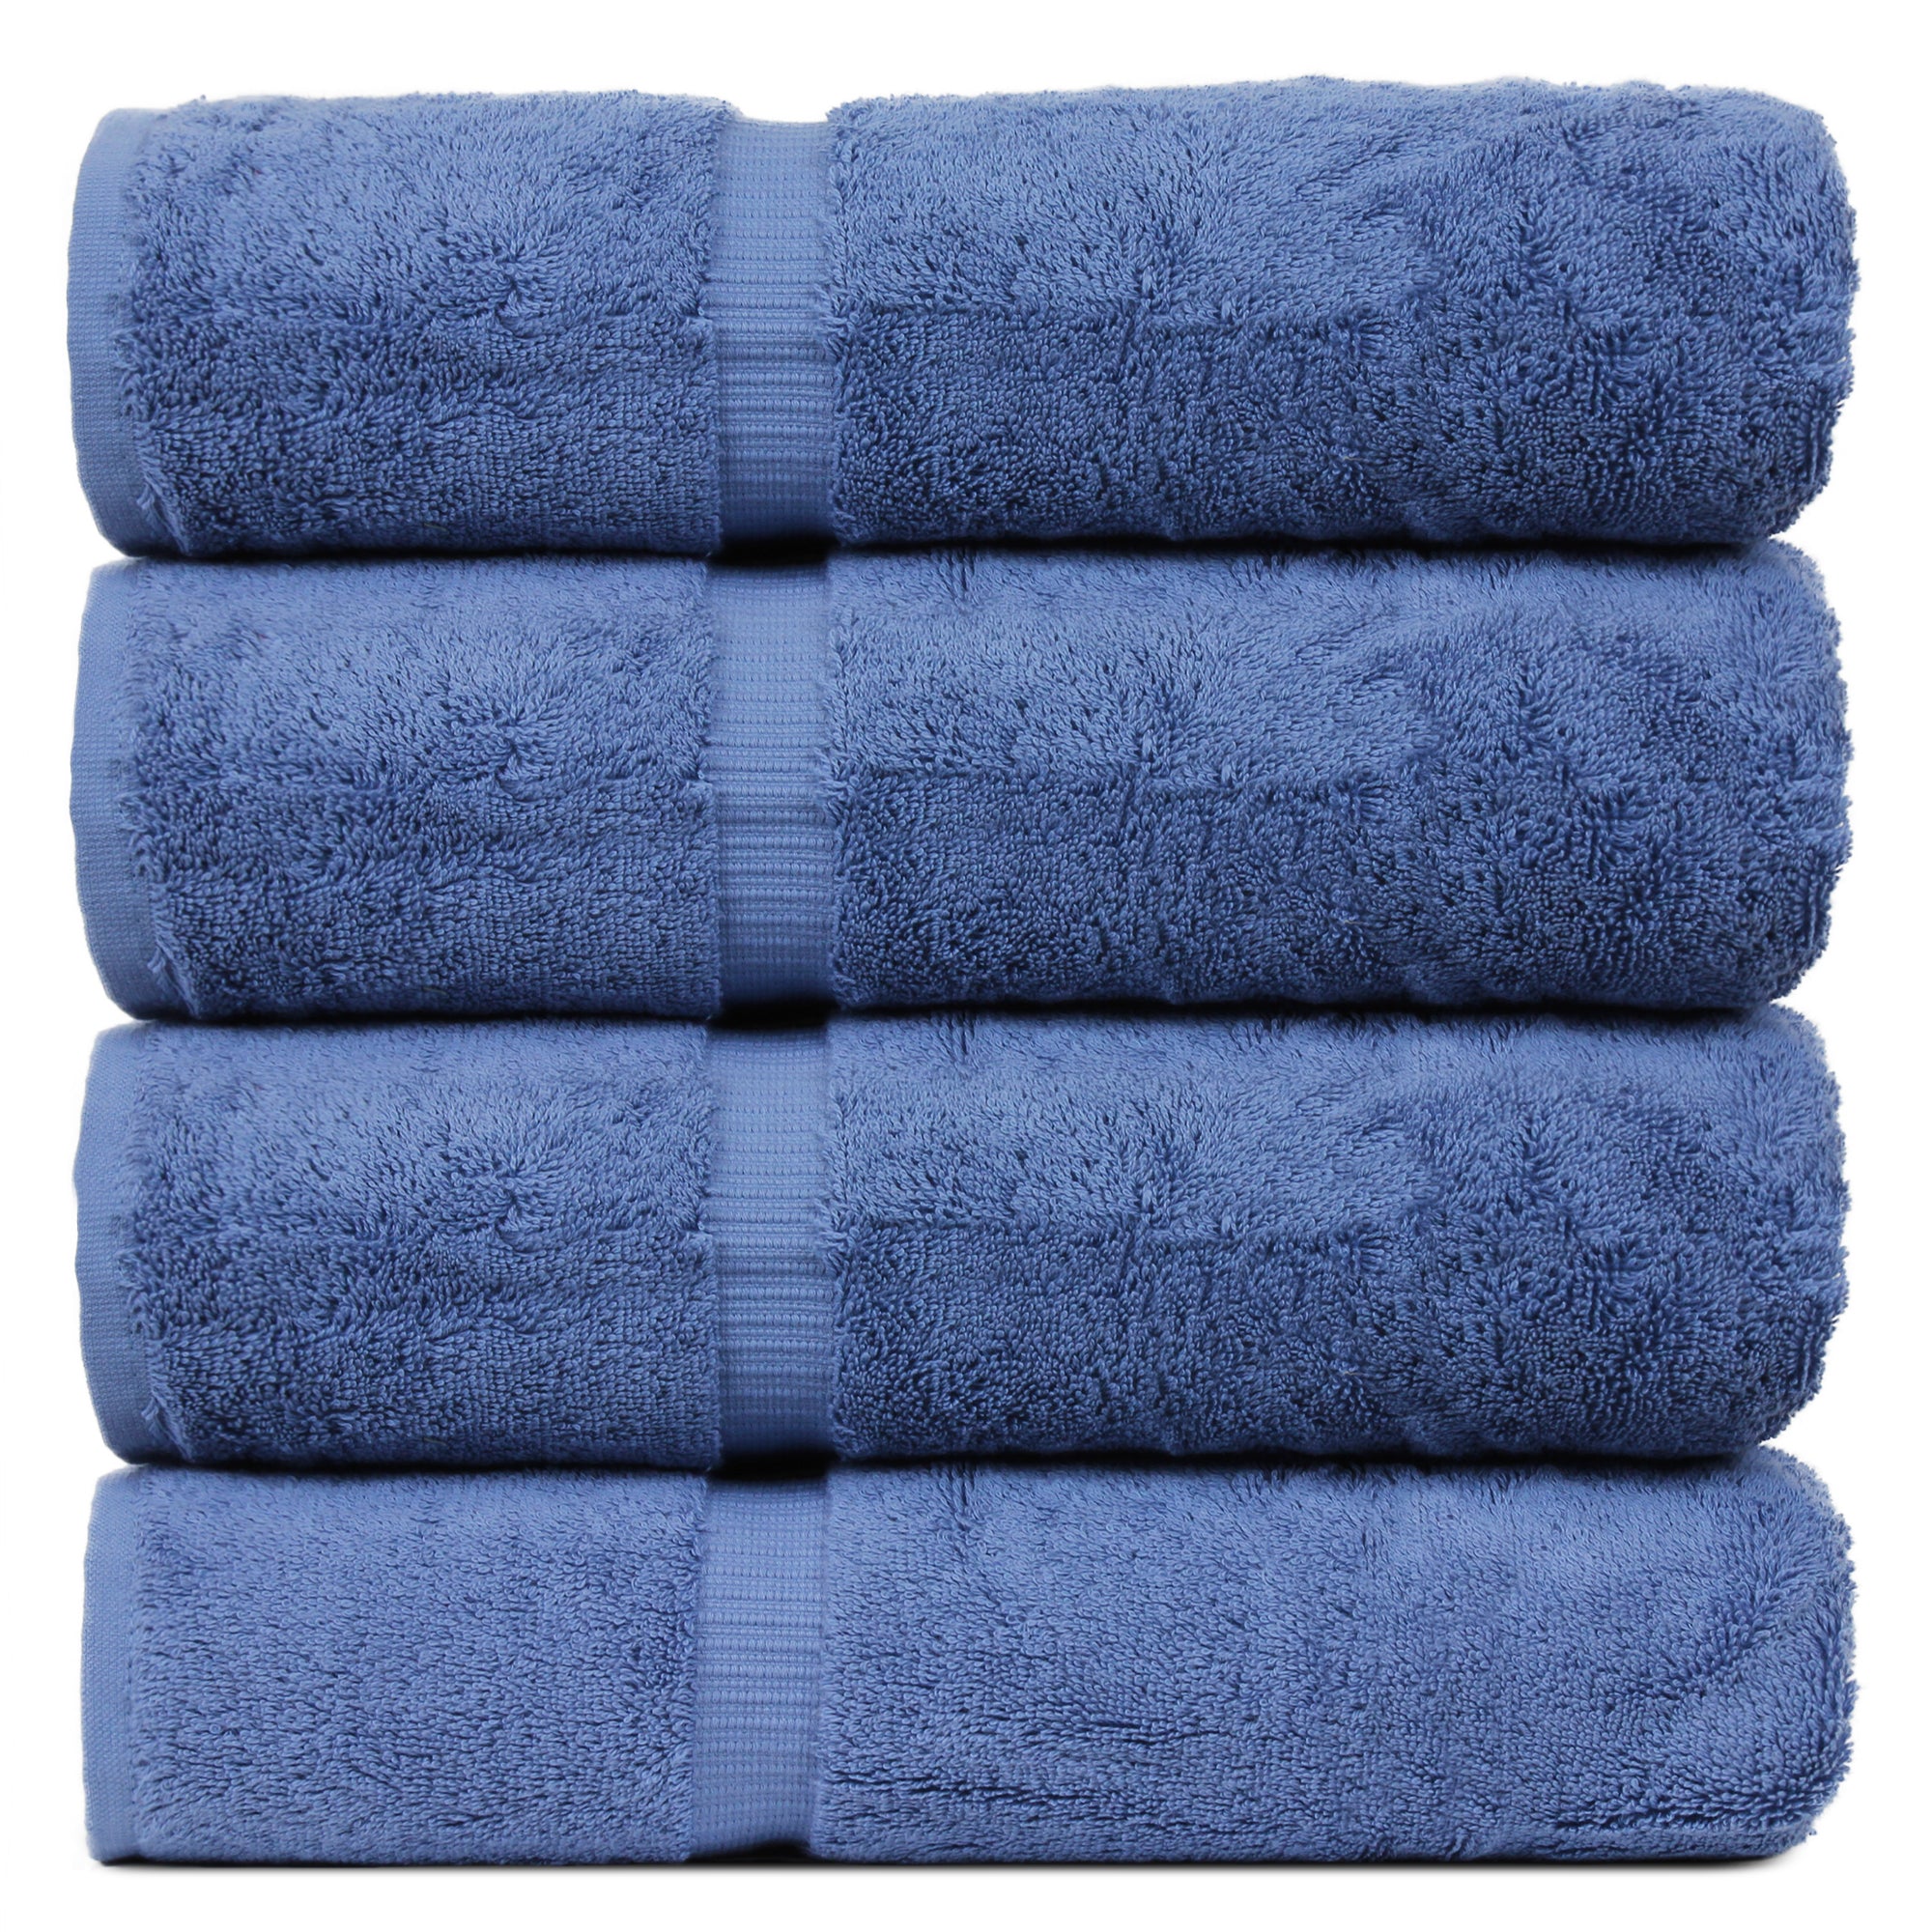 Luxury Hotel Collection Cotton-Eco Gray Bath Towels - Dobby Border - Set of  4 - Bed Bath & Beyond - 19671426